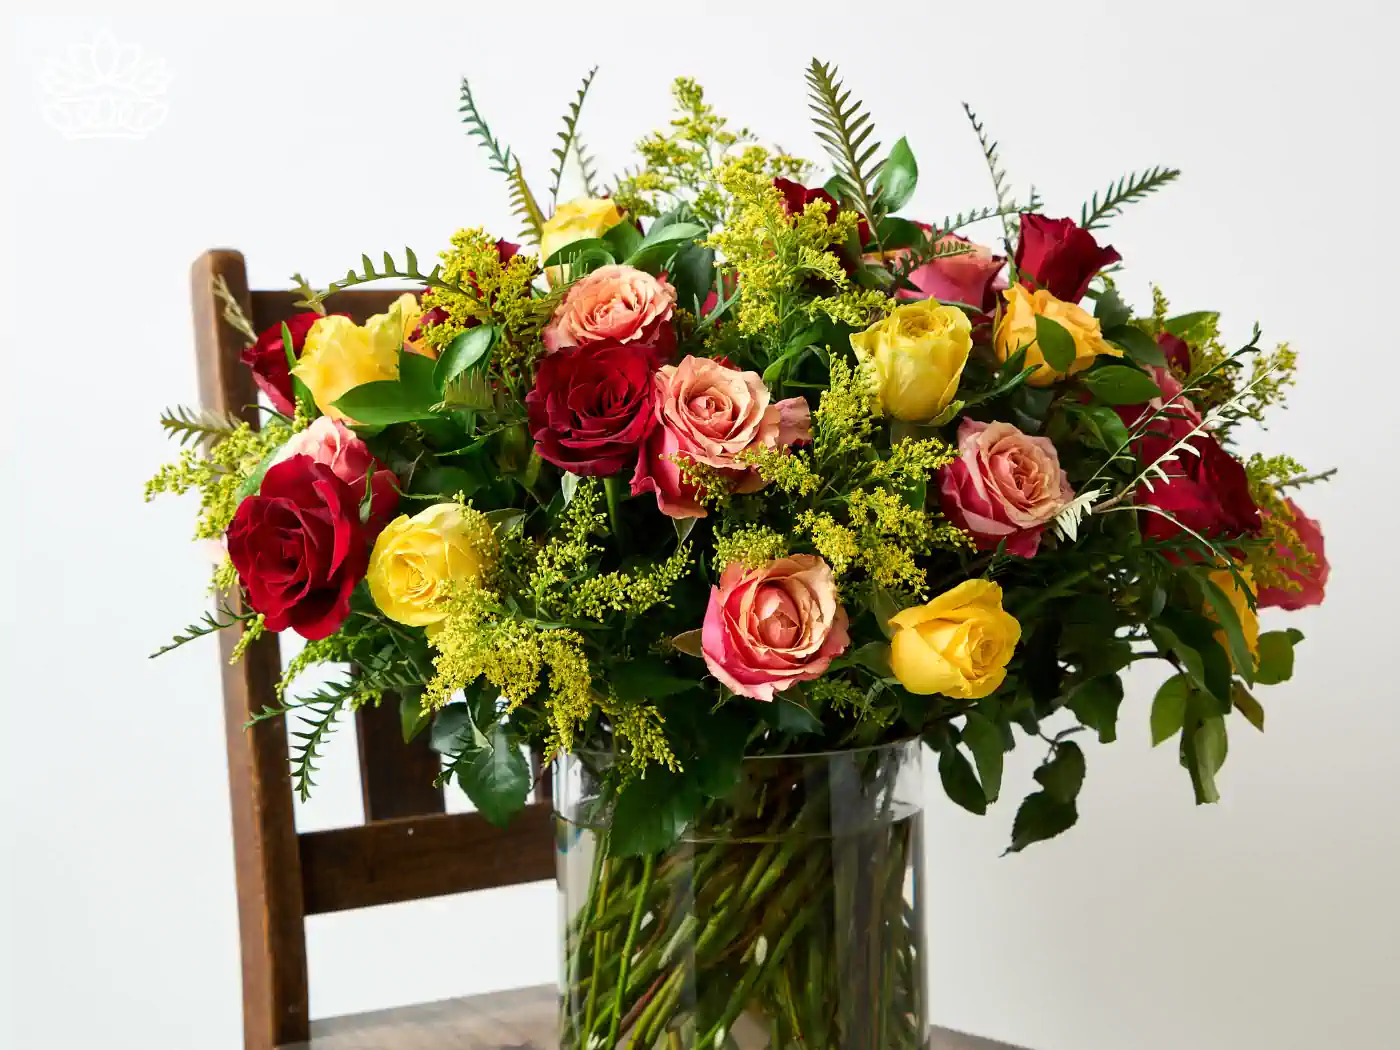 Luxurious bouquet of vibrant red, yellow, and pink roses with lush greenery and delicate yellow solidago, displayed in a clear vase on a wooden chair. 